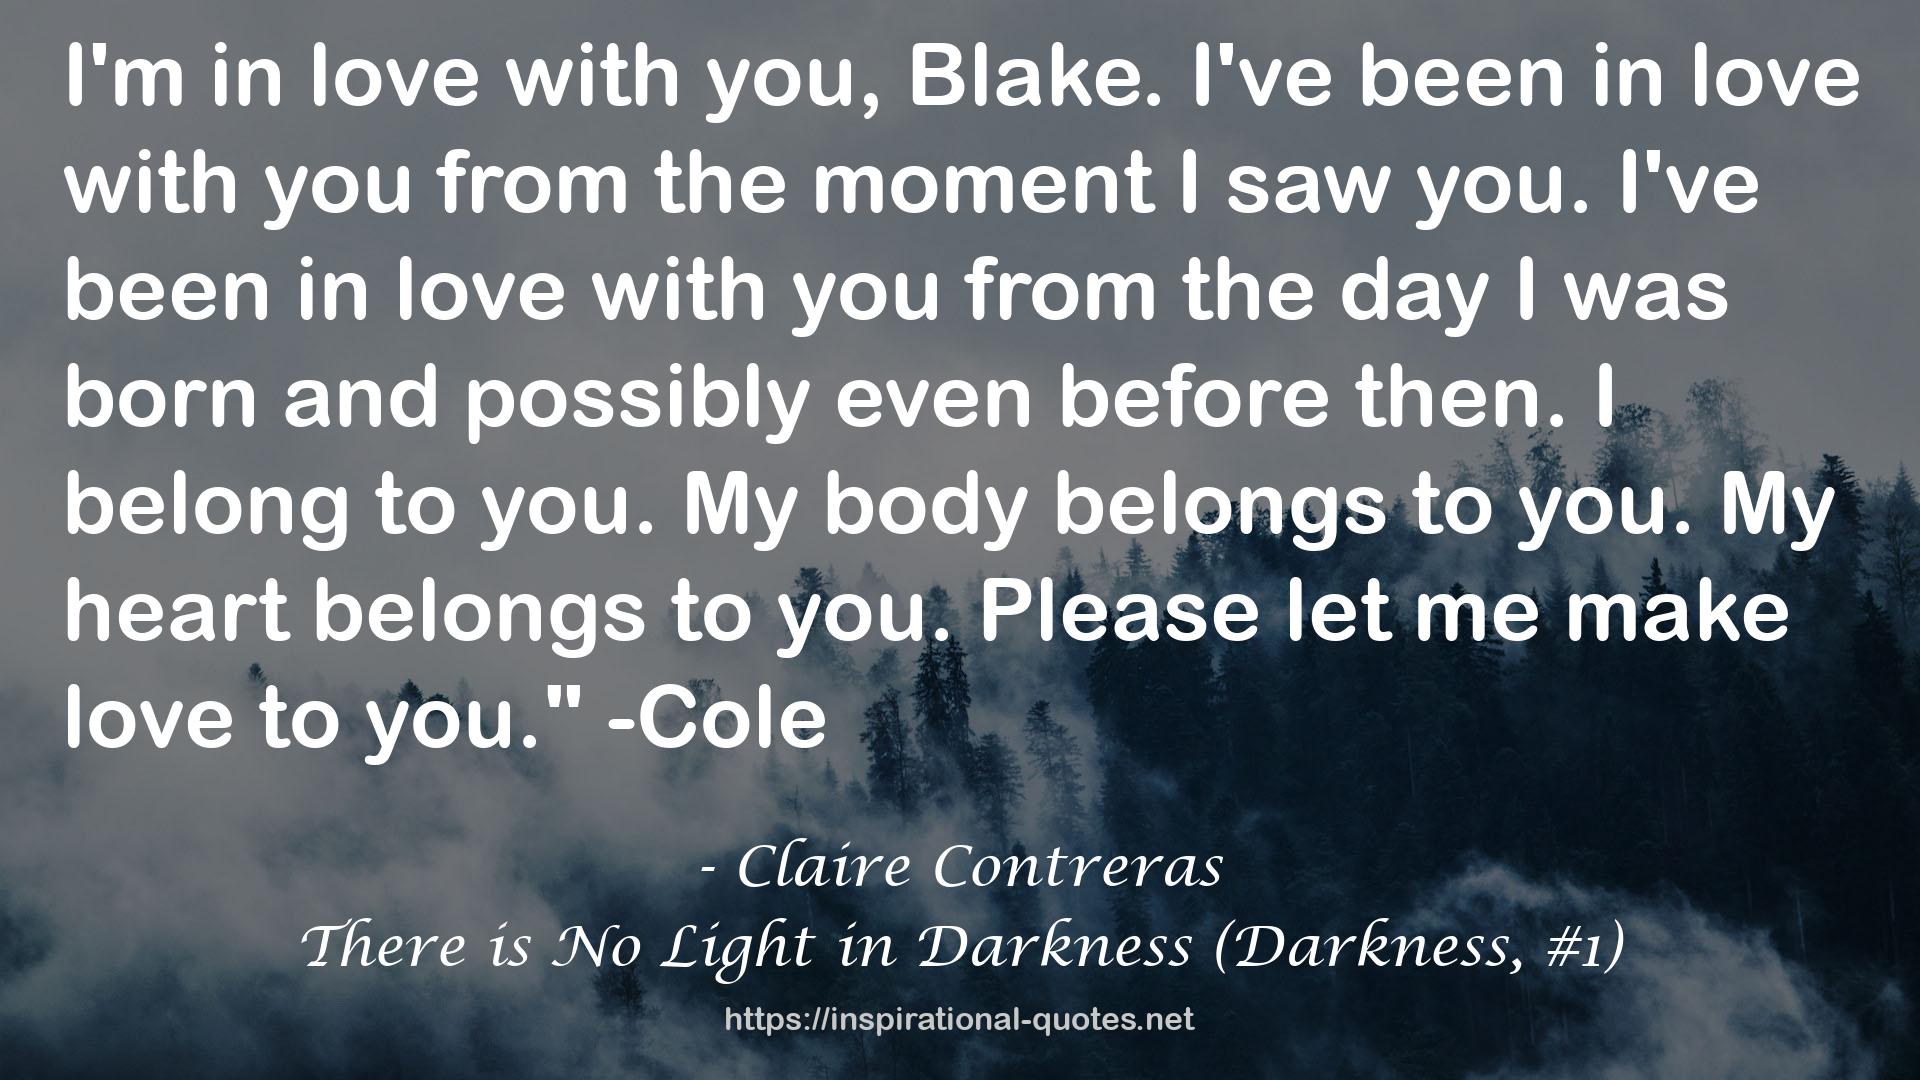 There is No Light in Darkness (Darkness, #1) QUOTES